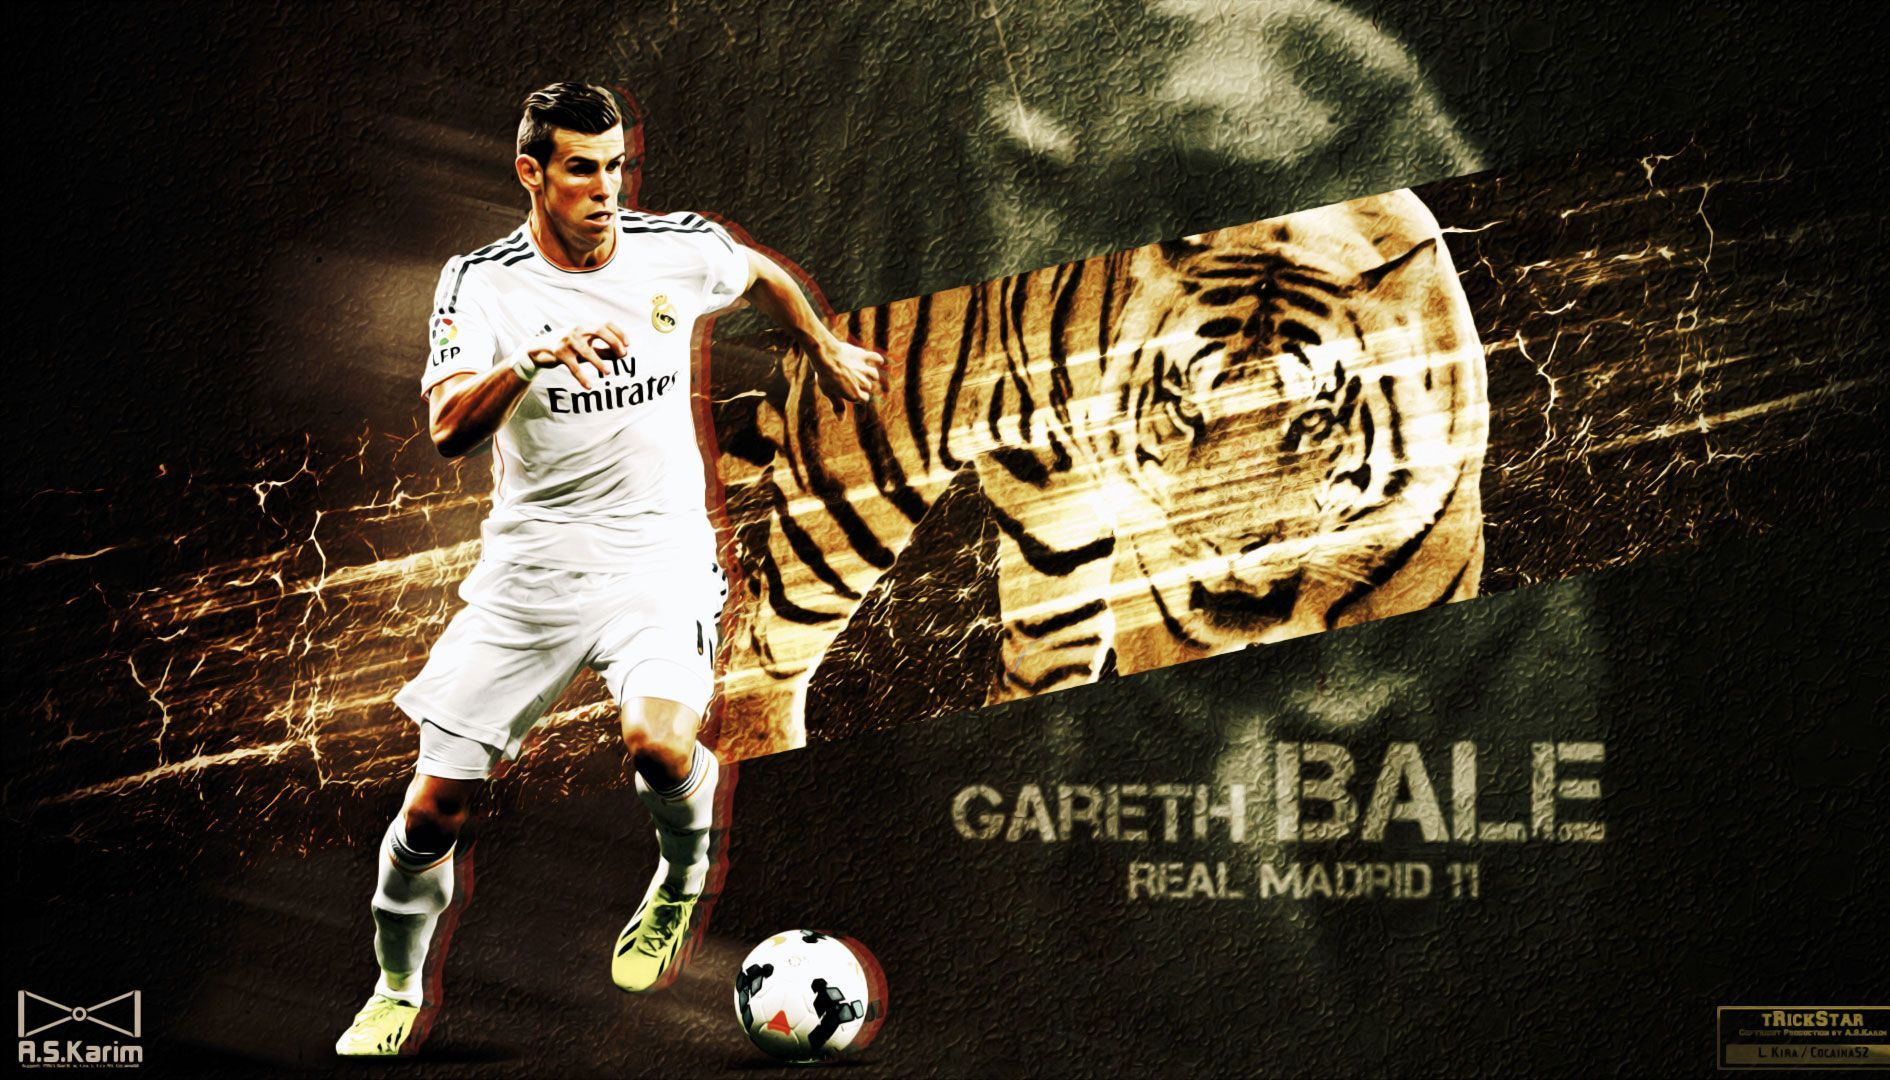 Wallpaper field, lawn, Mike, hairstyle, real Madrid, Bale, Real madrid,  bezel images for desktop, section спорт - download